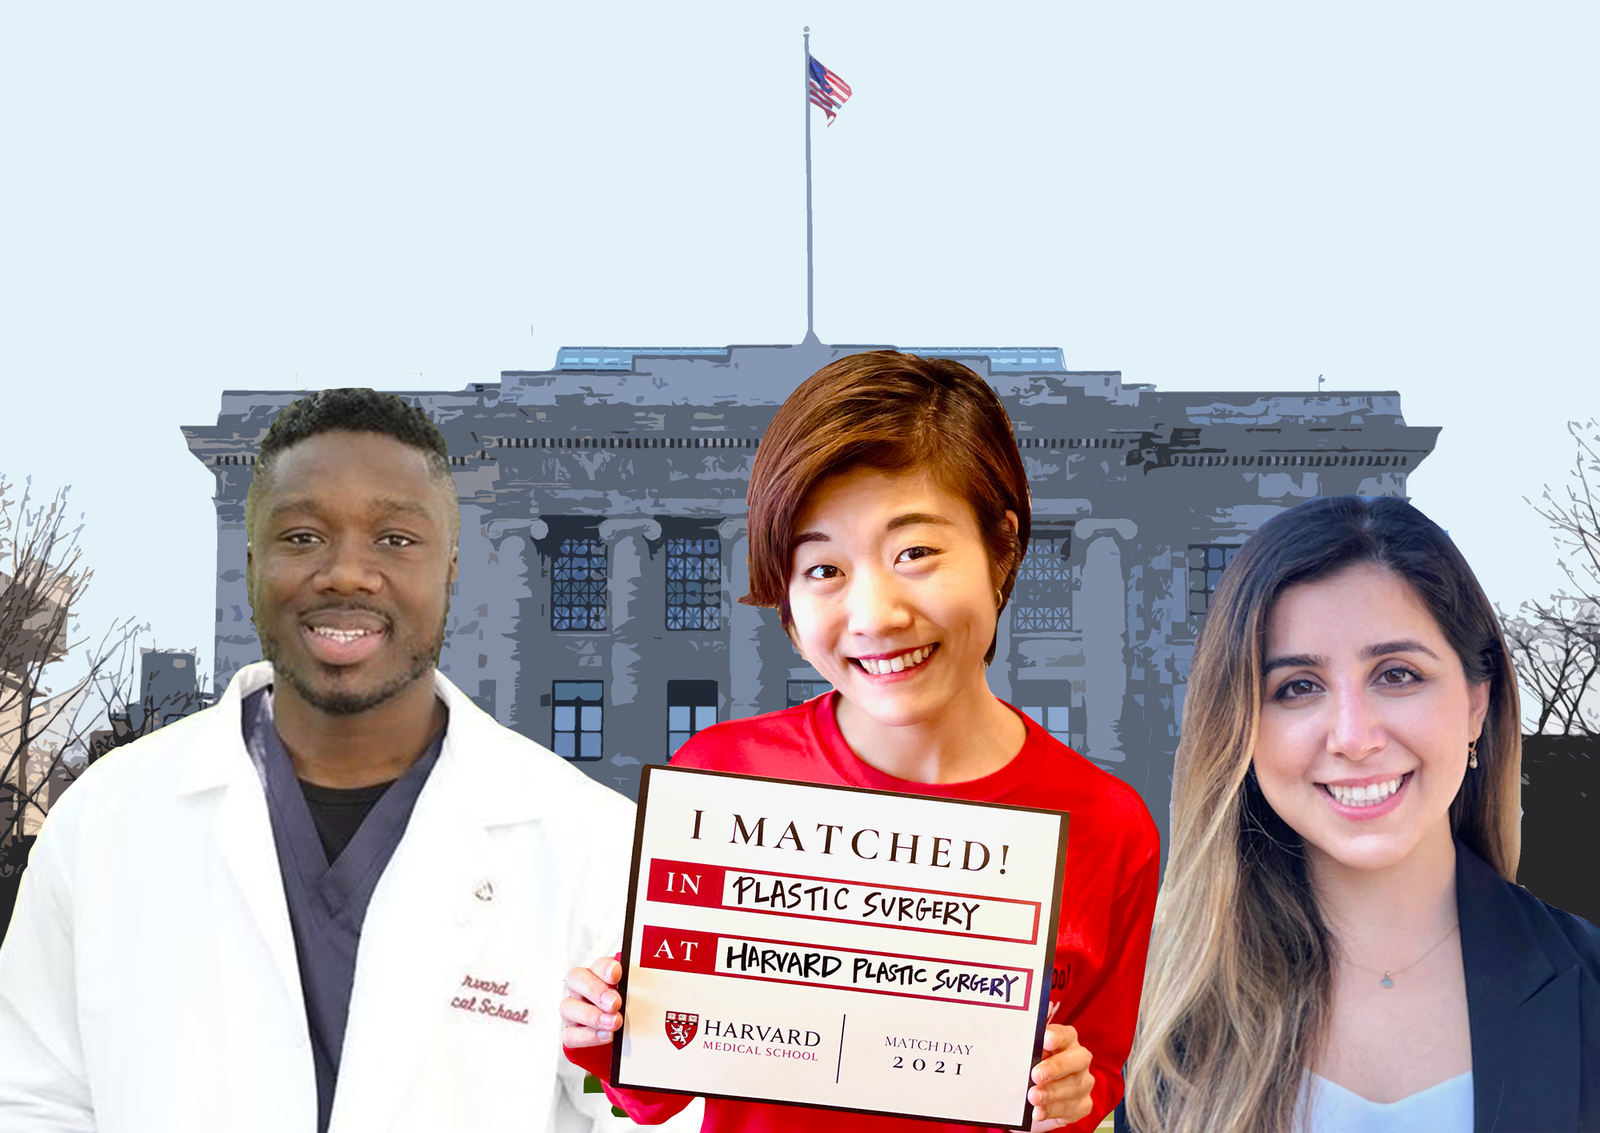 Medical School Students ‘Thrilled’ to Receive Residency Placements During Virtual Match Day | News